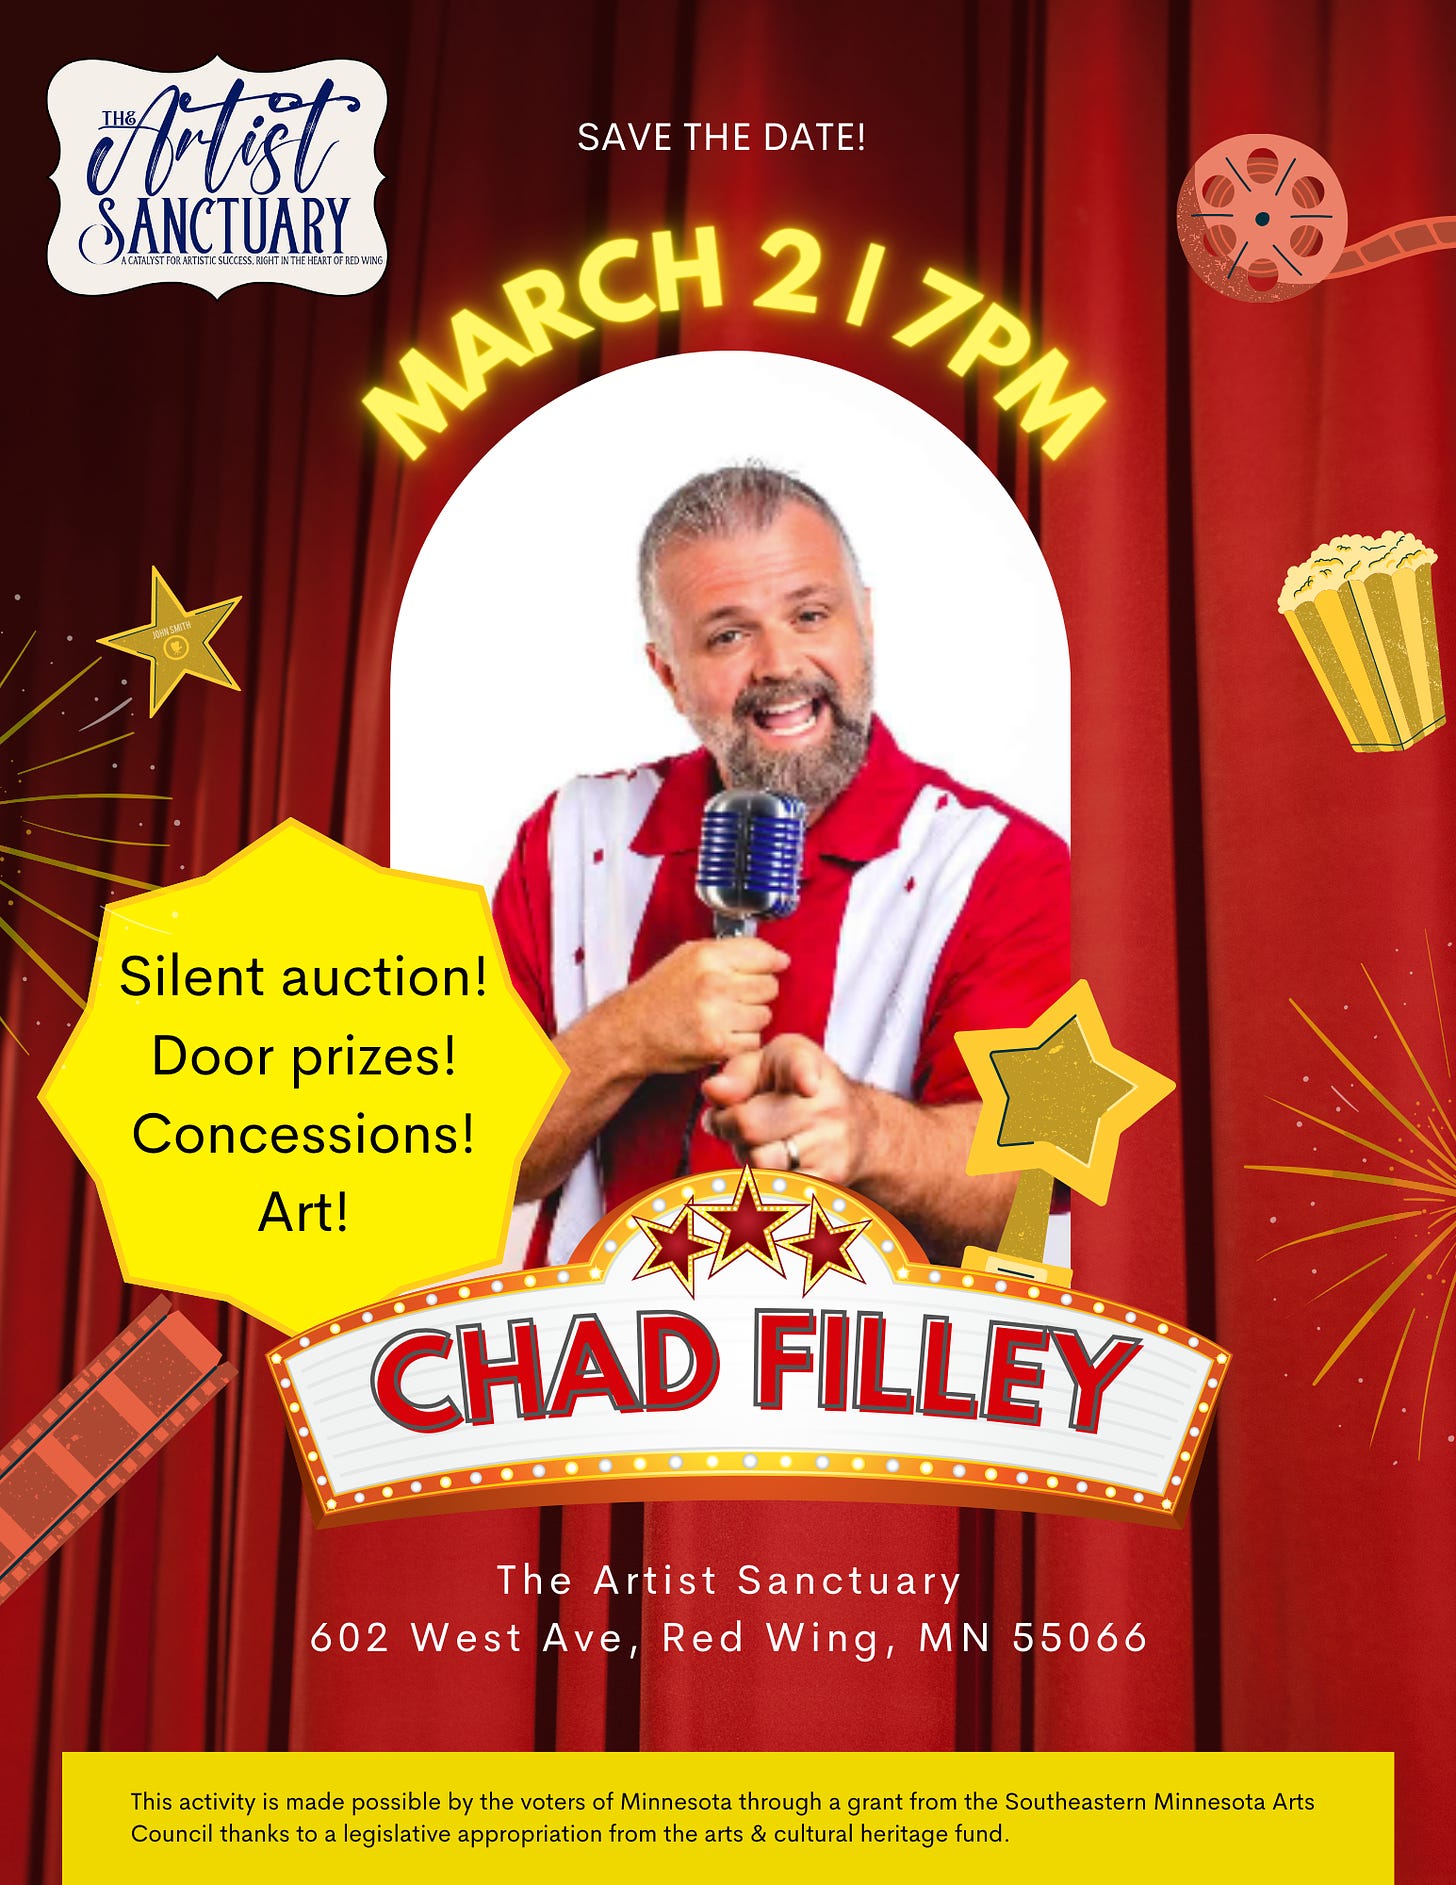 Chad Filley fundraiser March 2nd 7PM